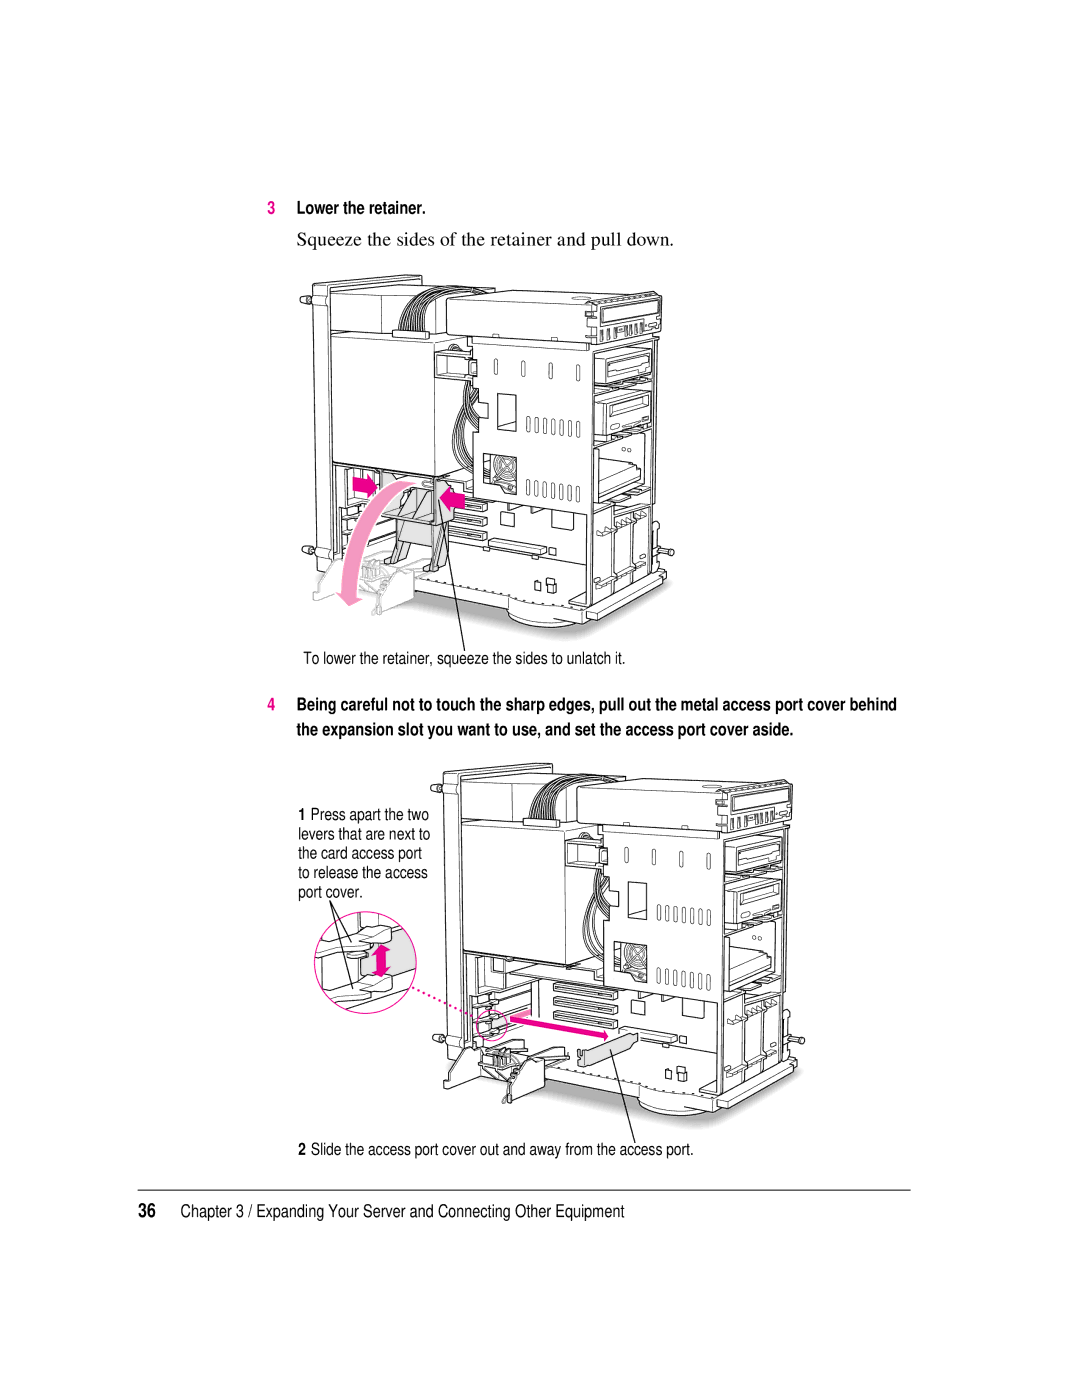 Apple 8550 technical specifications Squeeze the sides of the retainer and pull down 